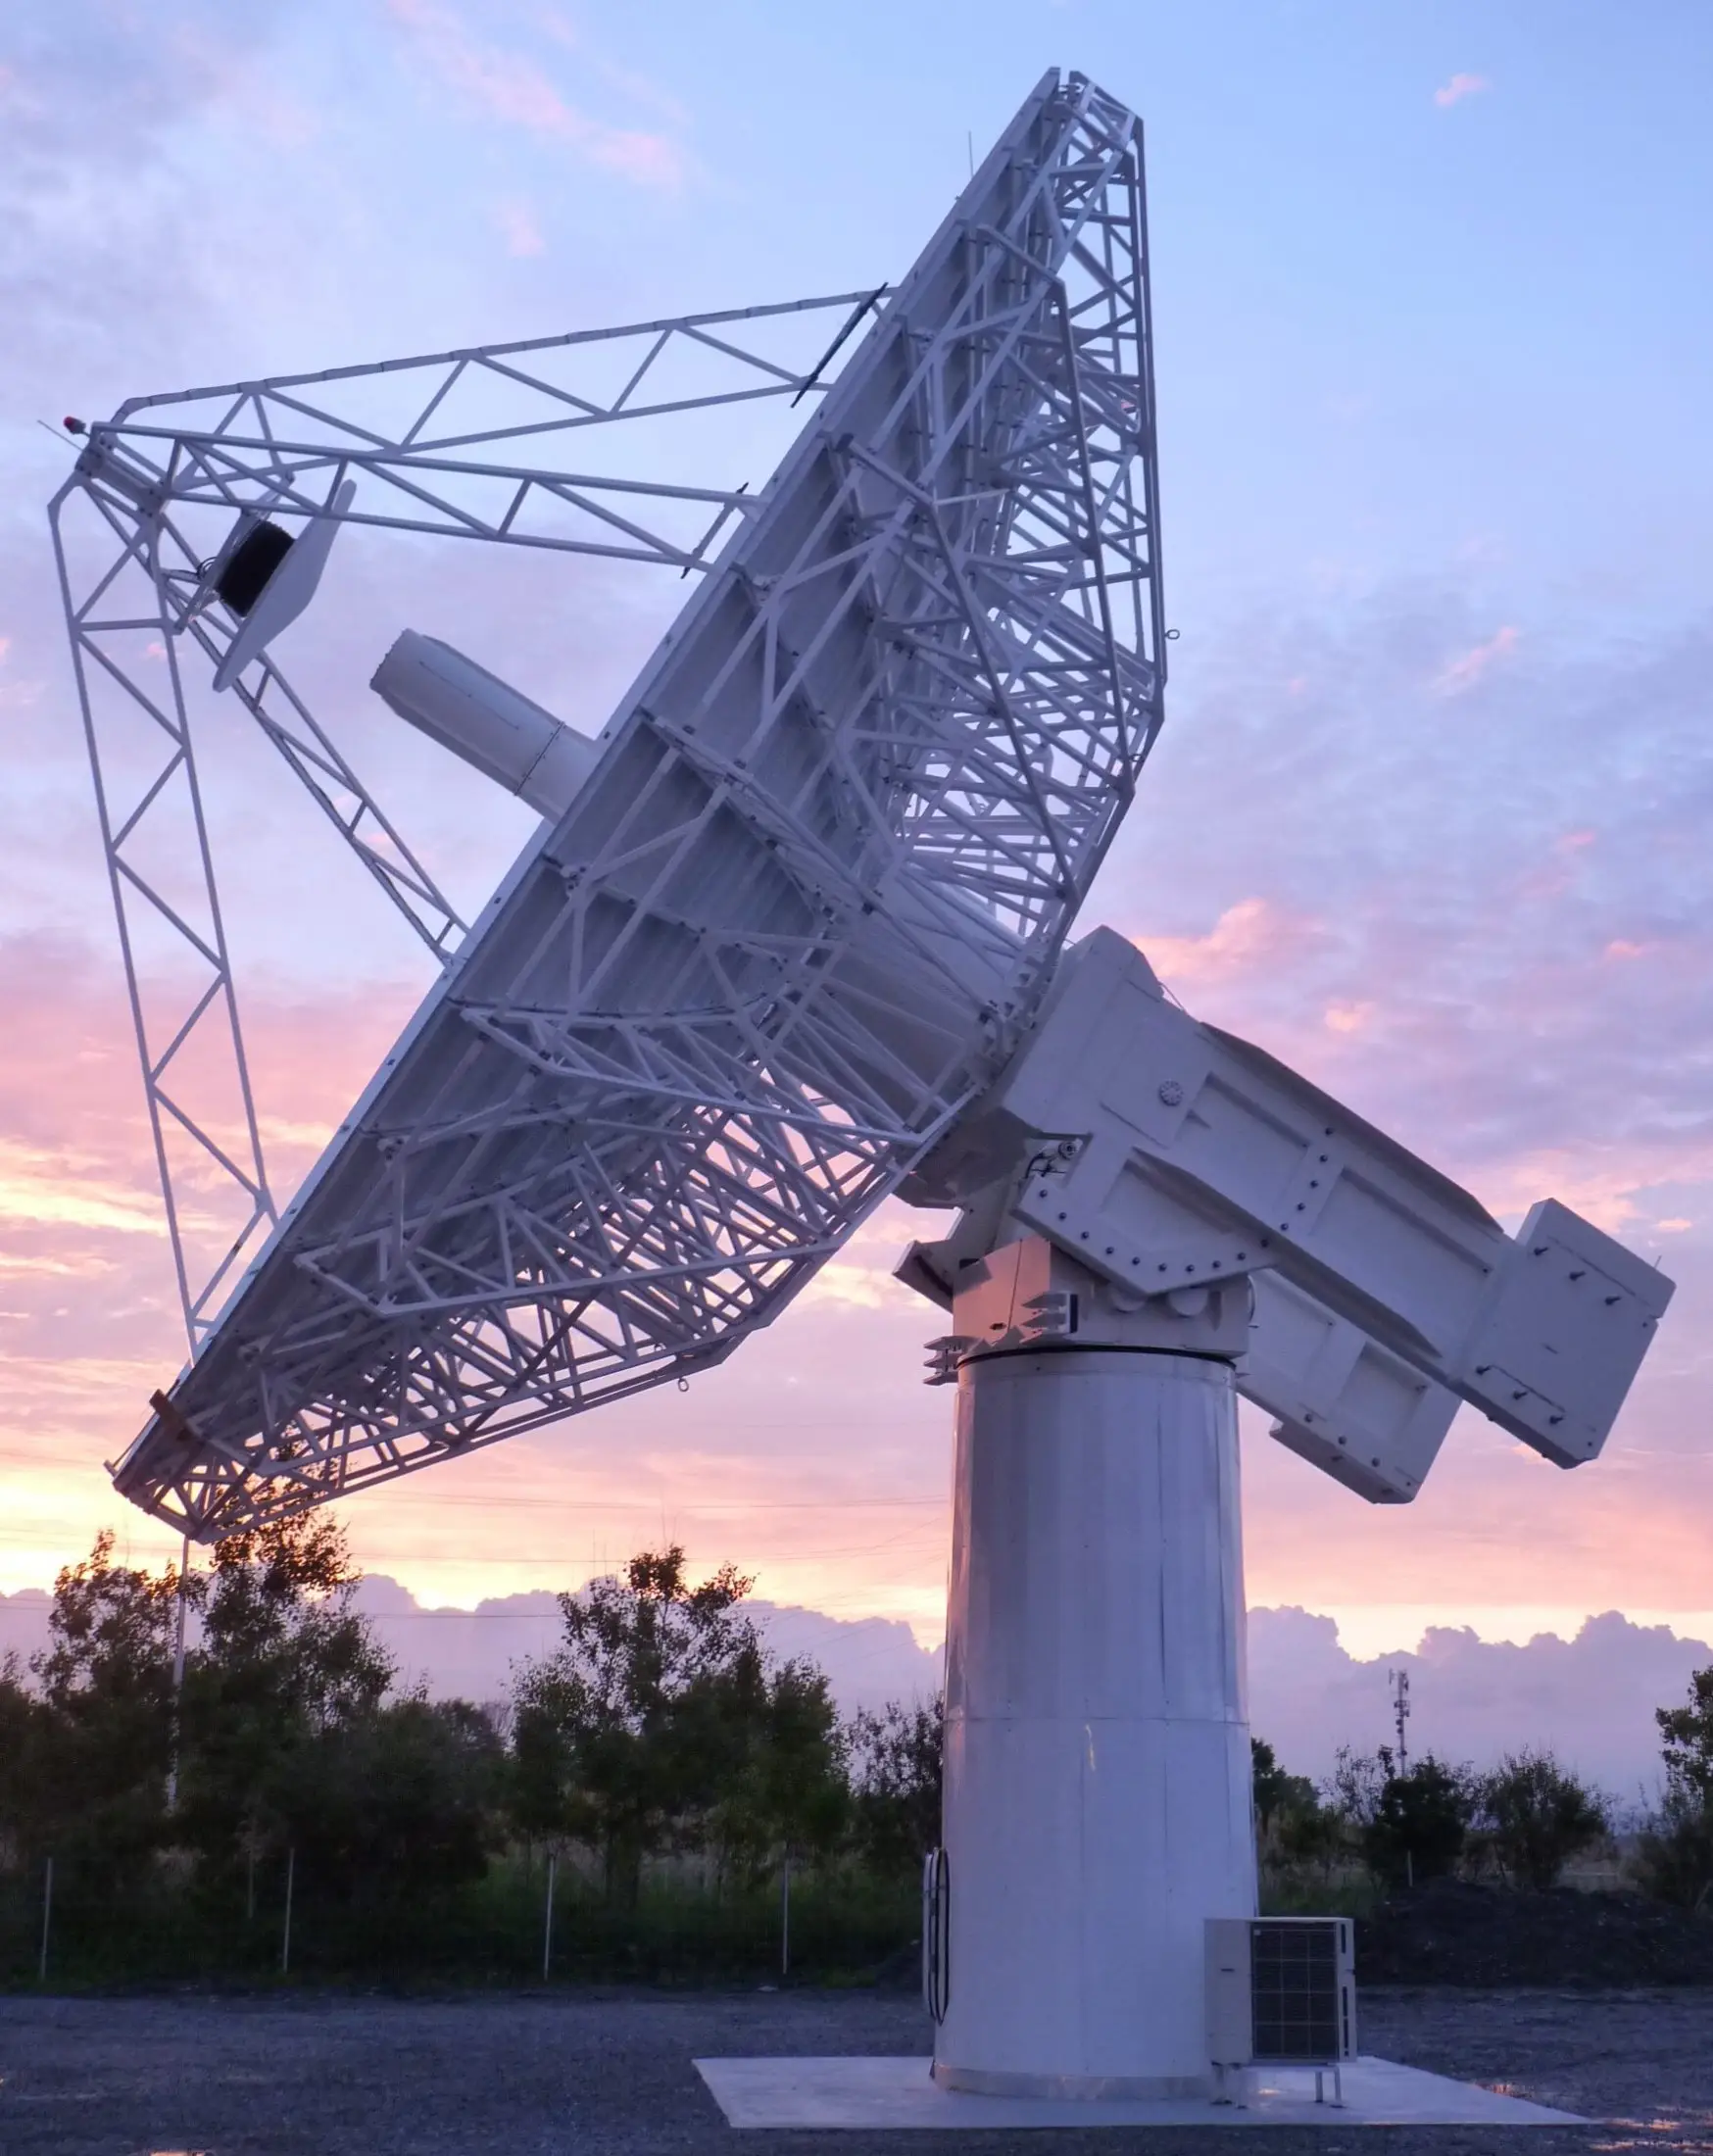 Large radio telescope pointing upward during a sunset with vibrant pink and orange sky in the background.